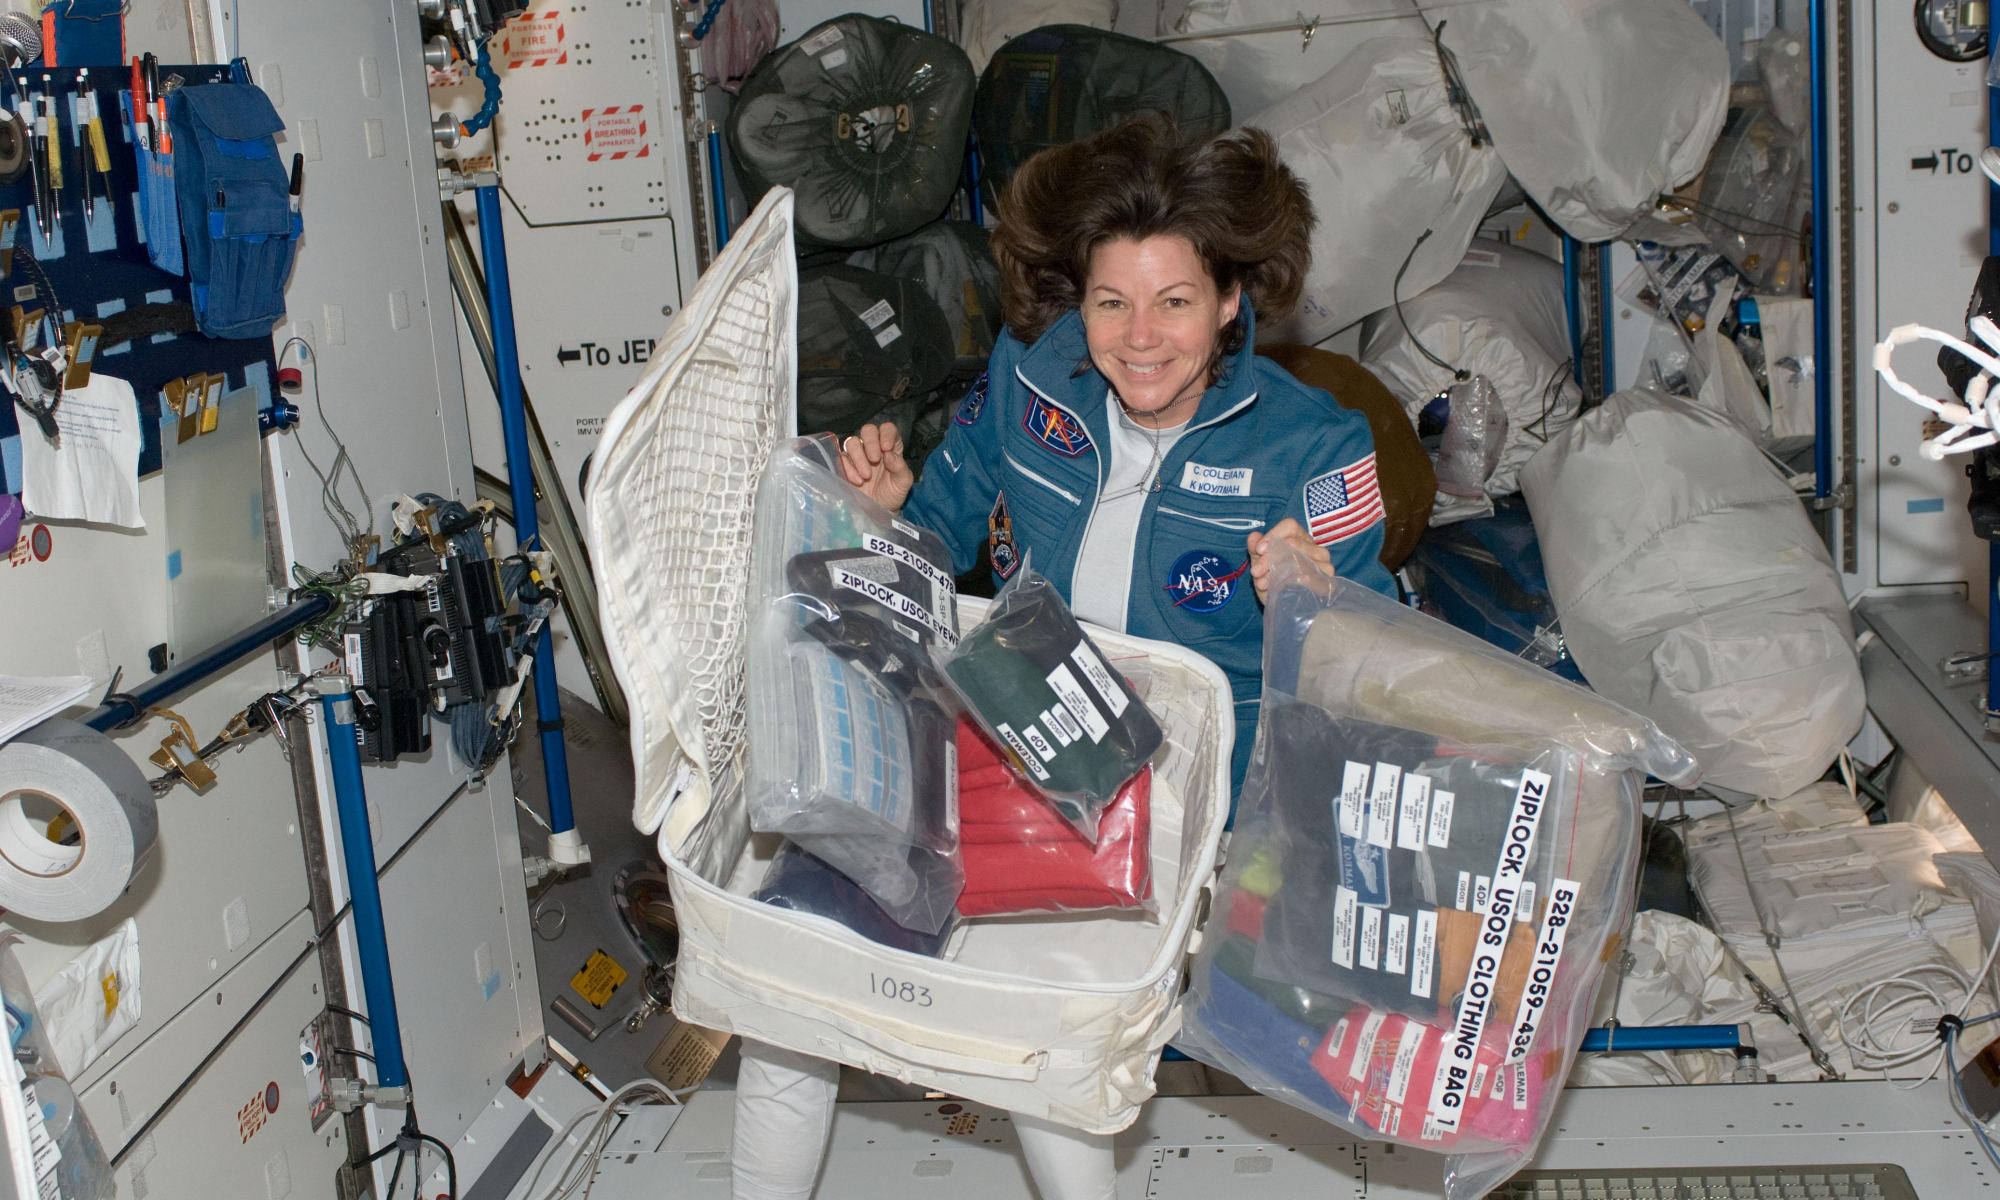 ISS026-E-011334 (18 Dec. 2010) --- NASA astronaut Catherine (Cady) Coleman, Expedition 26 flight engineer, is pictured with a stowage container and its contents in the Harmony node of the International Space Station.